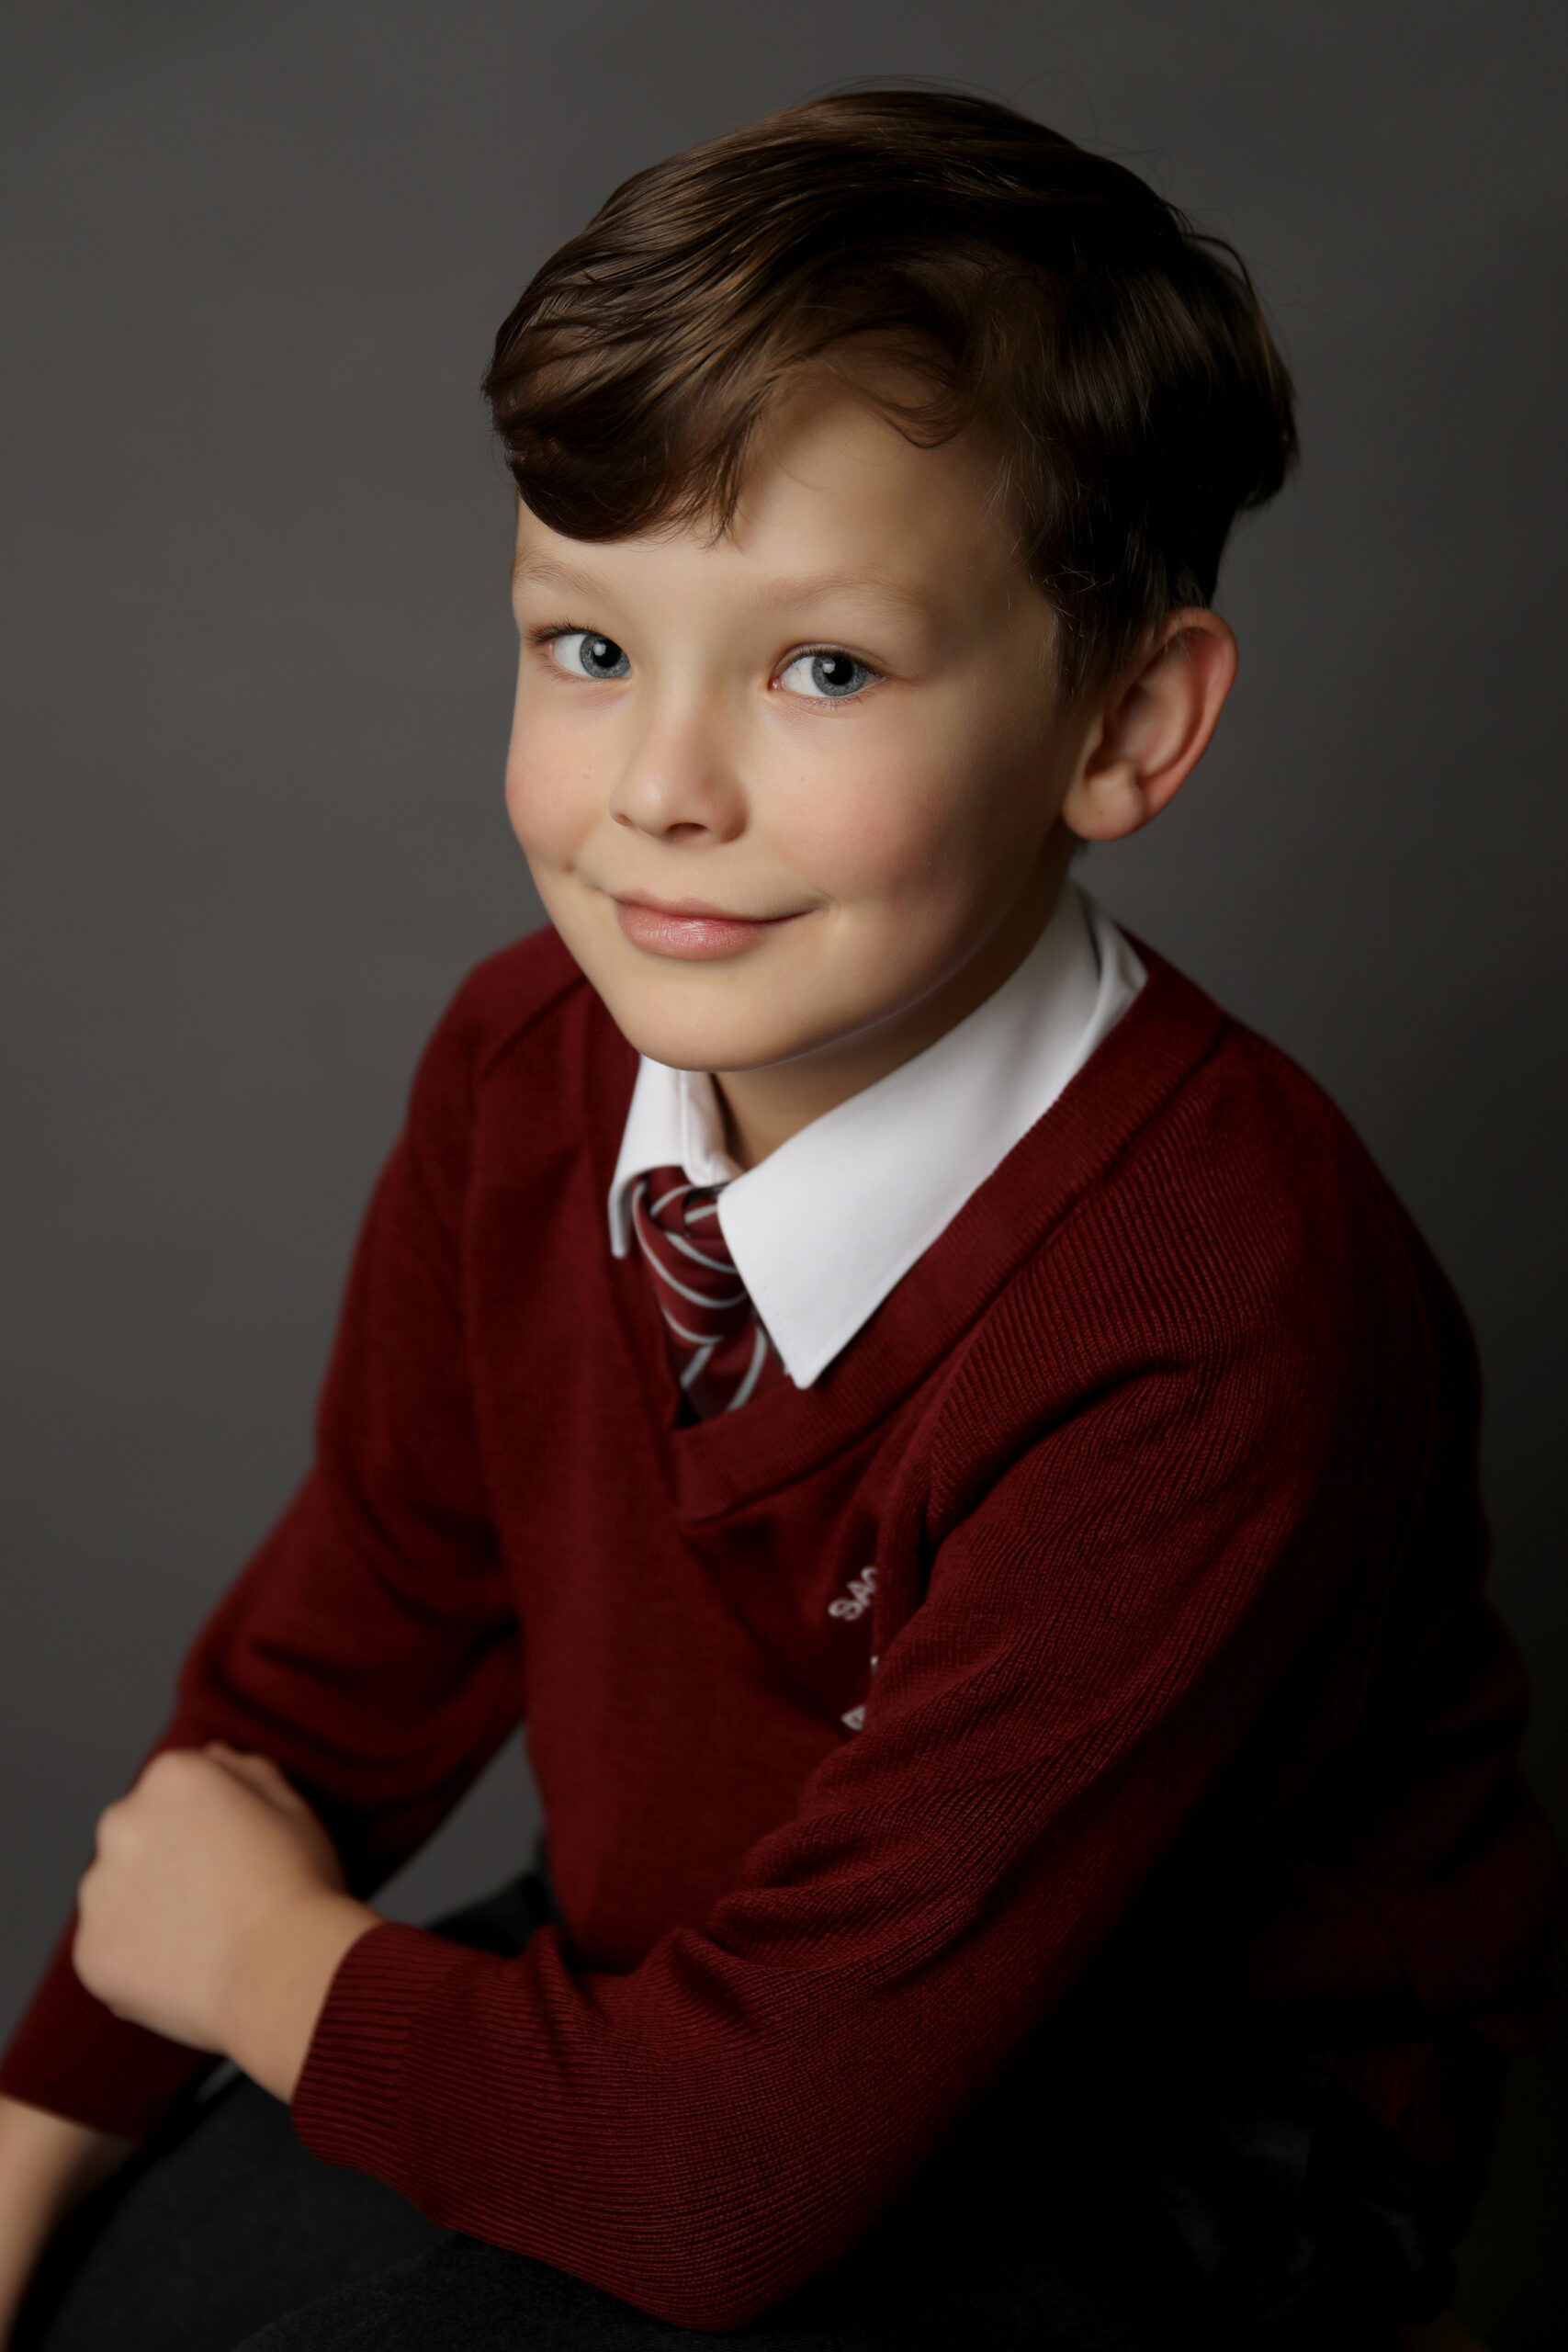 YOUNG BOY IN A BURGUNDY SCHOOL uniform in his school photo by Primary School Photographer Gateshead, Newcastle and County Durham